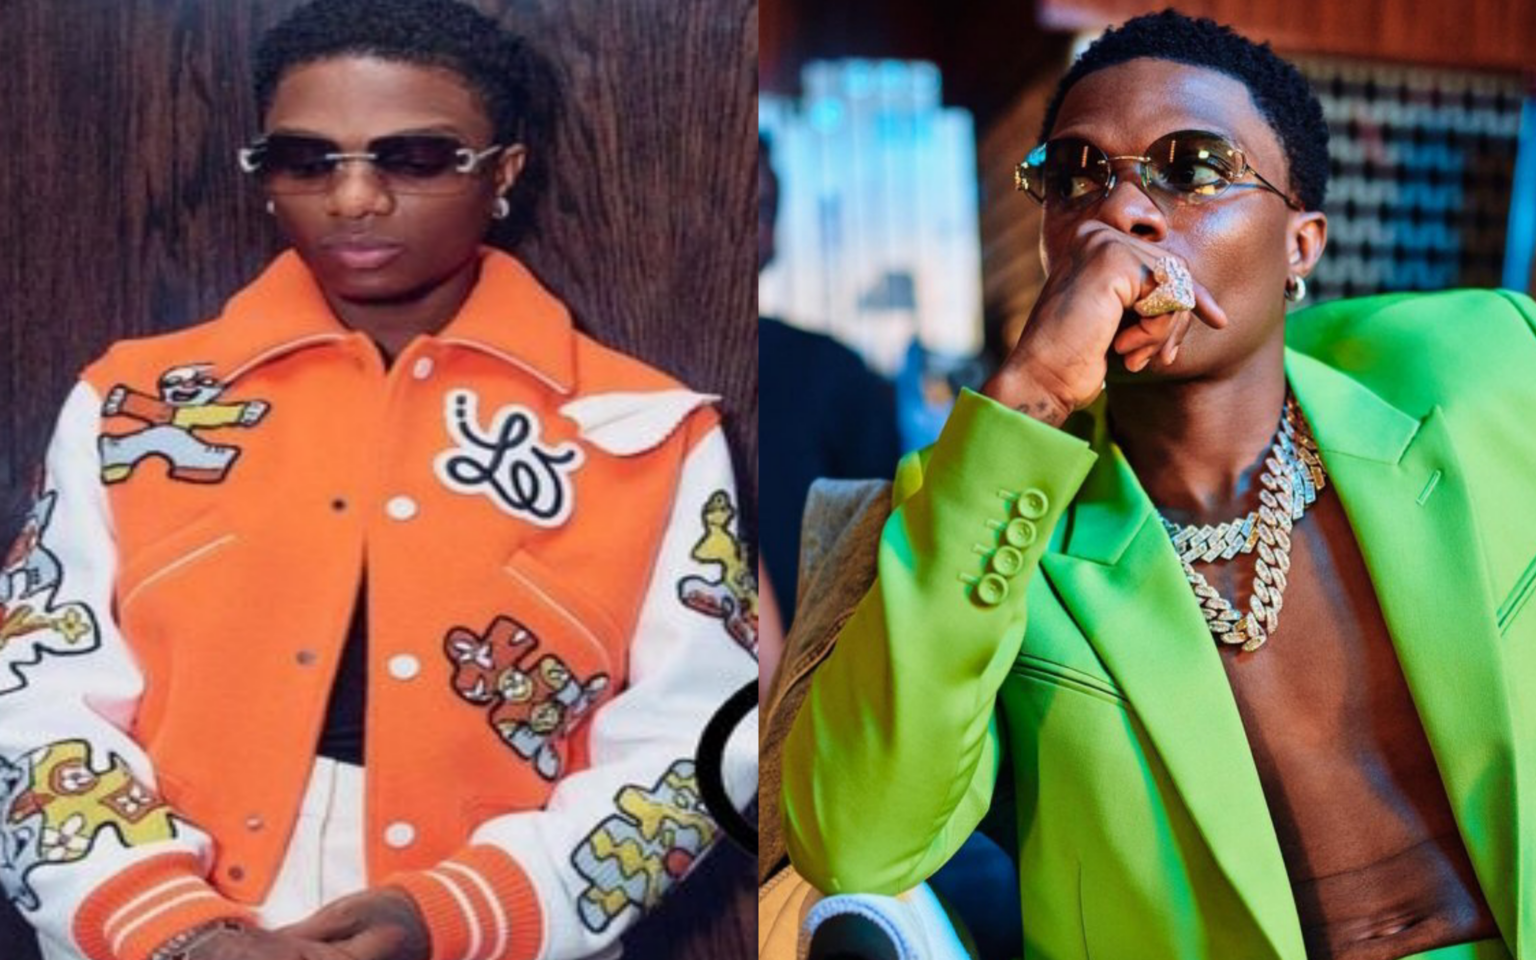 Netizens Reacts After WizKid didn't make the list of performers at the NBA all-star game